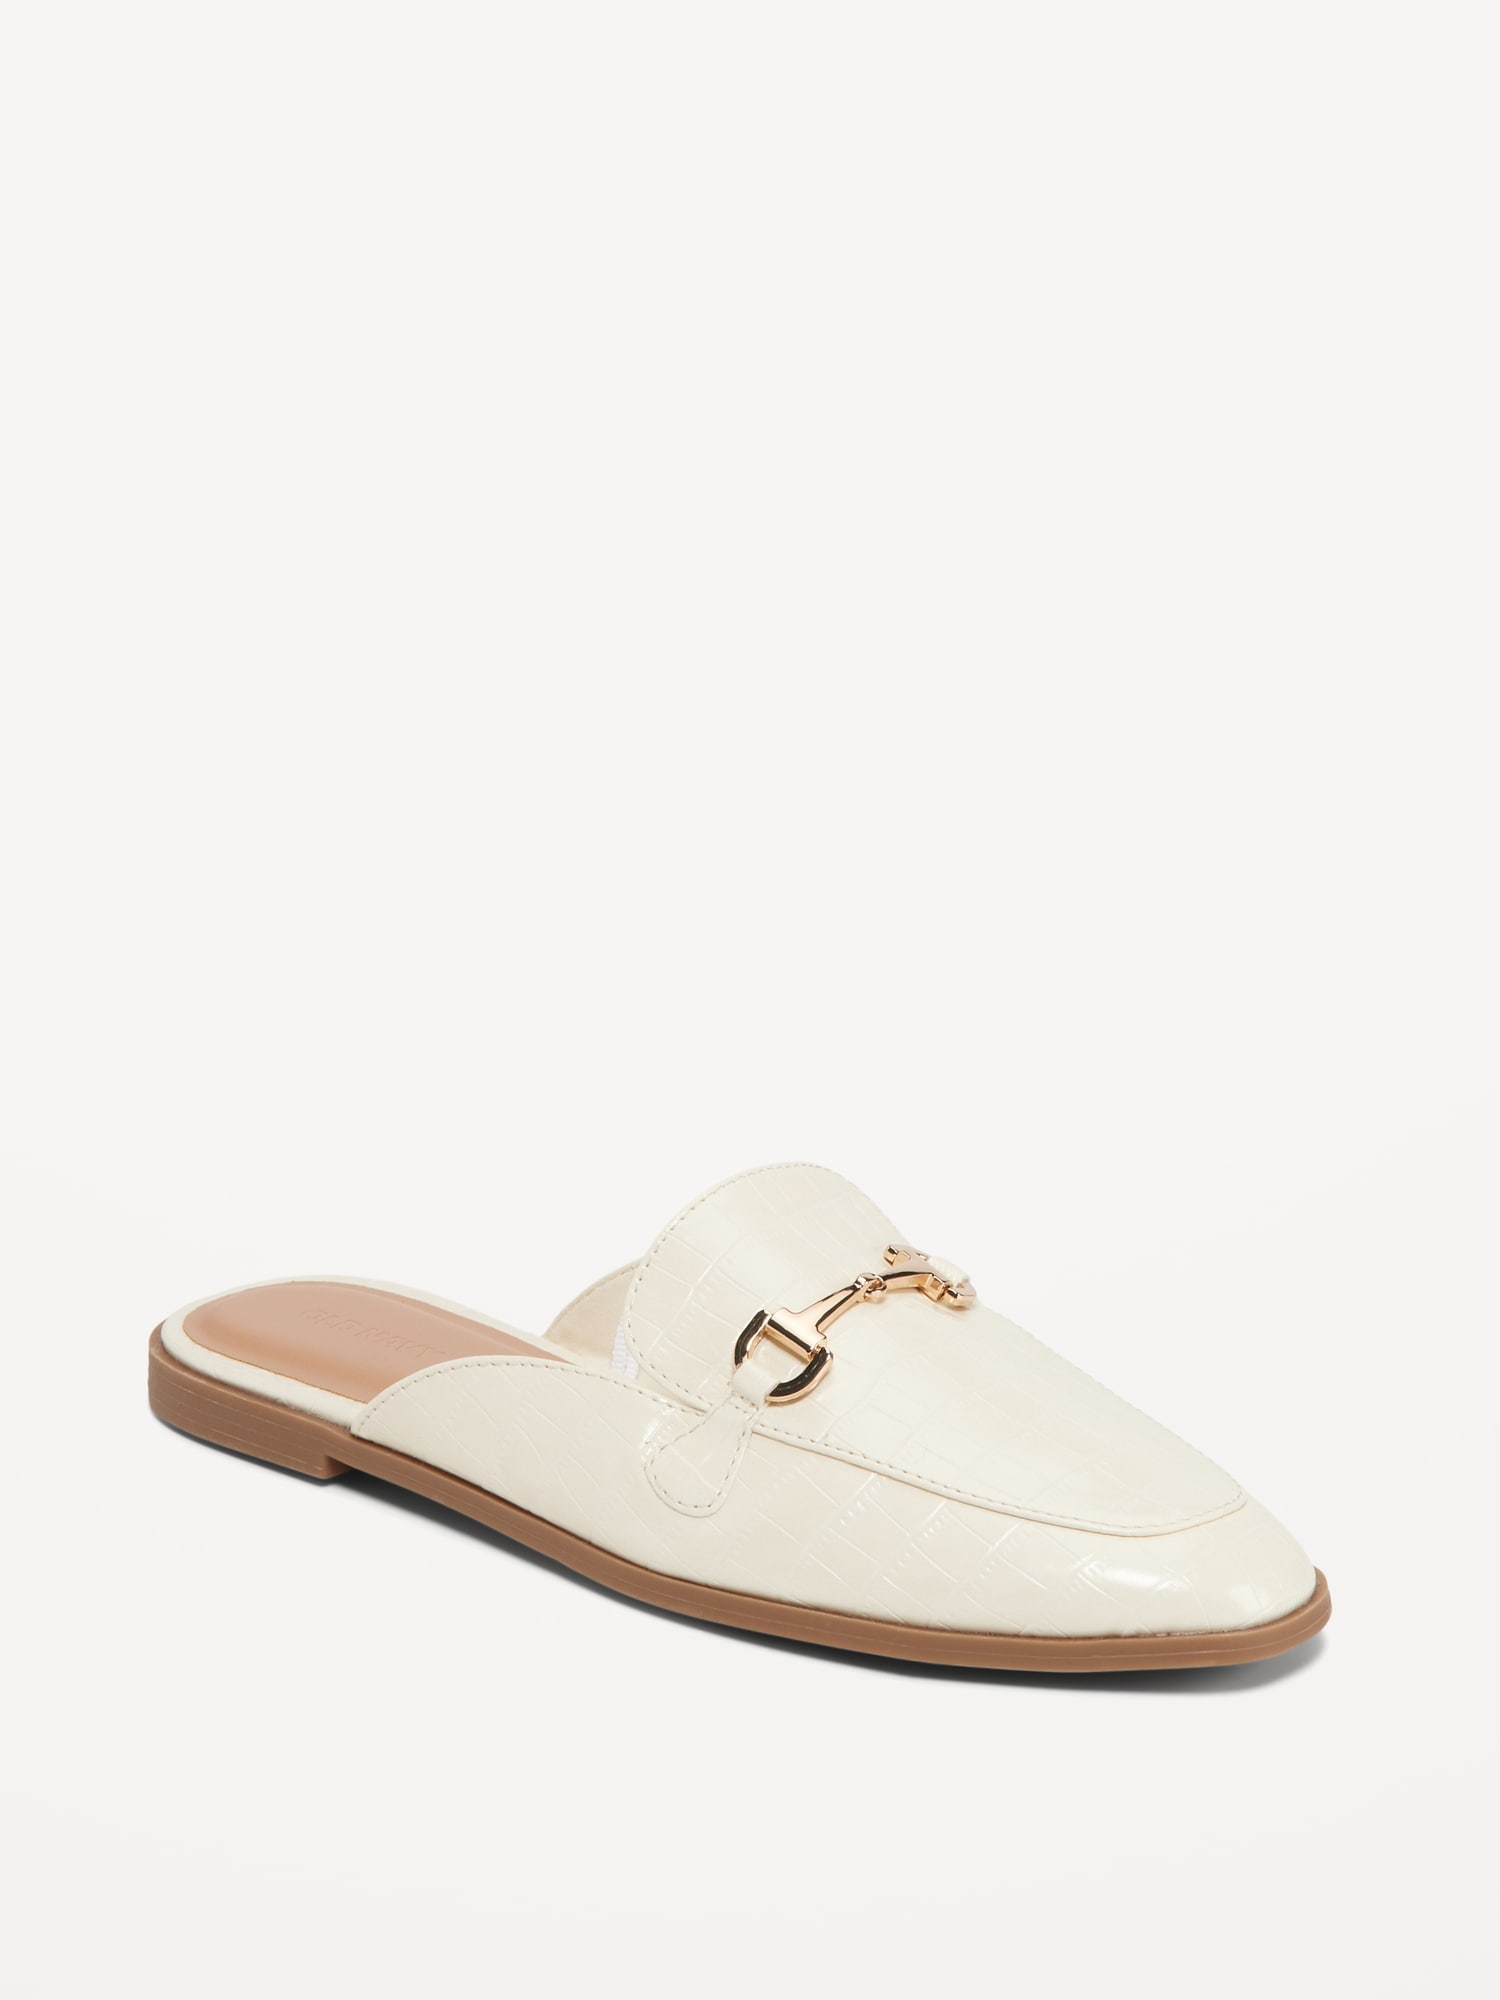 Faux-Leather Loafer Mule Shoes for Women | Old Navy